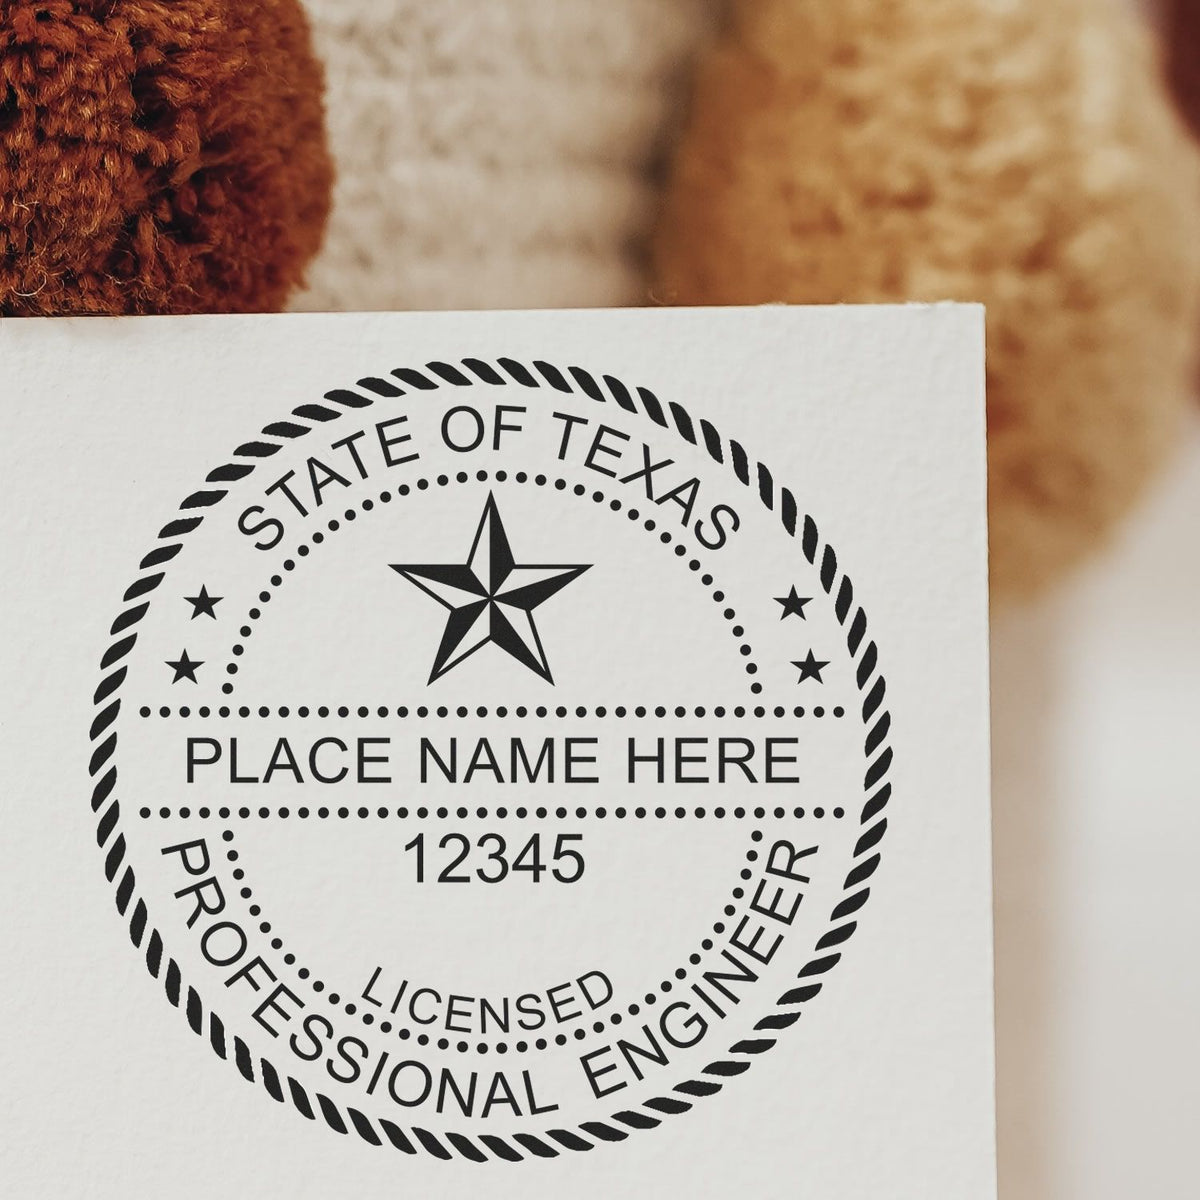 This paper is stamped with a sample imprint of the Texas Professional Engineer Seal Stamp, signifying its quality and reliability.